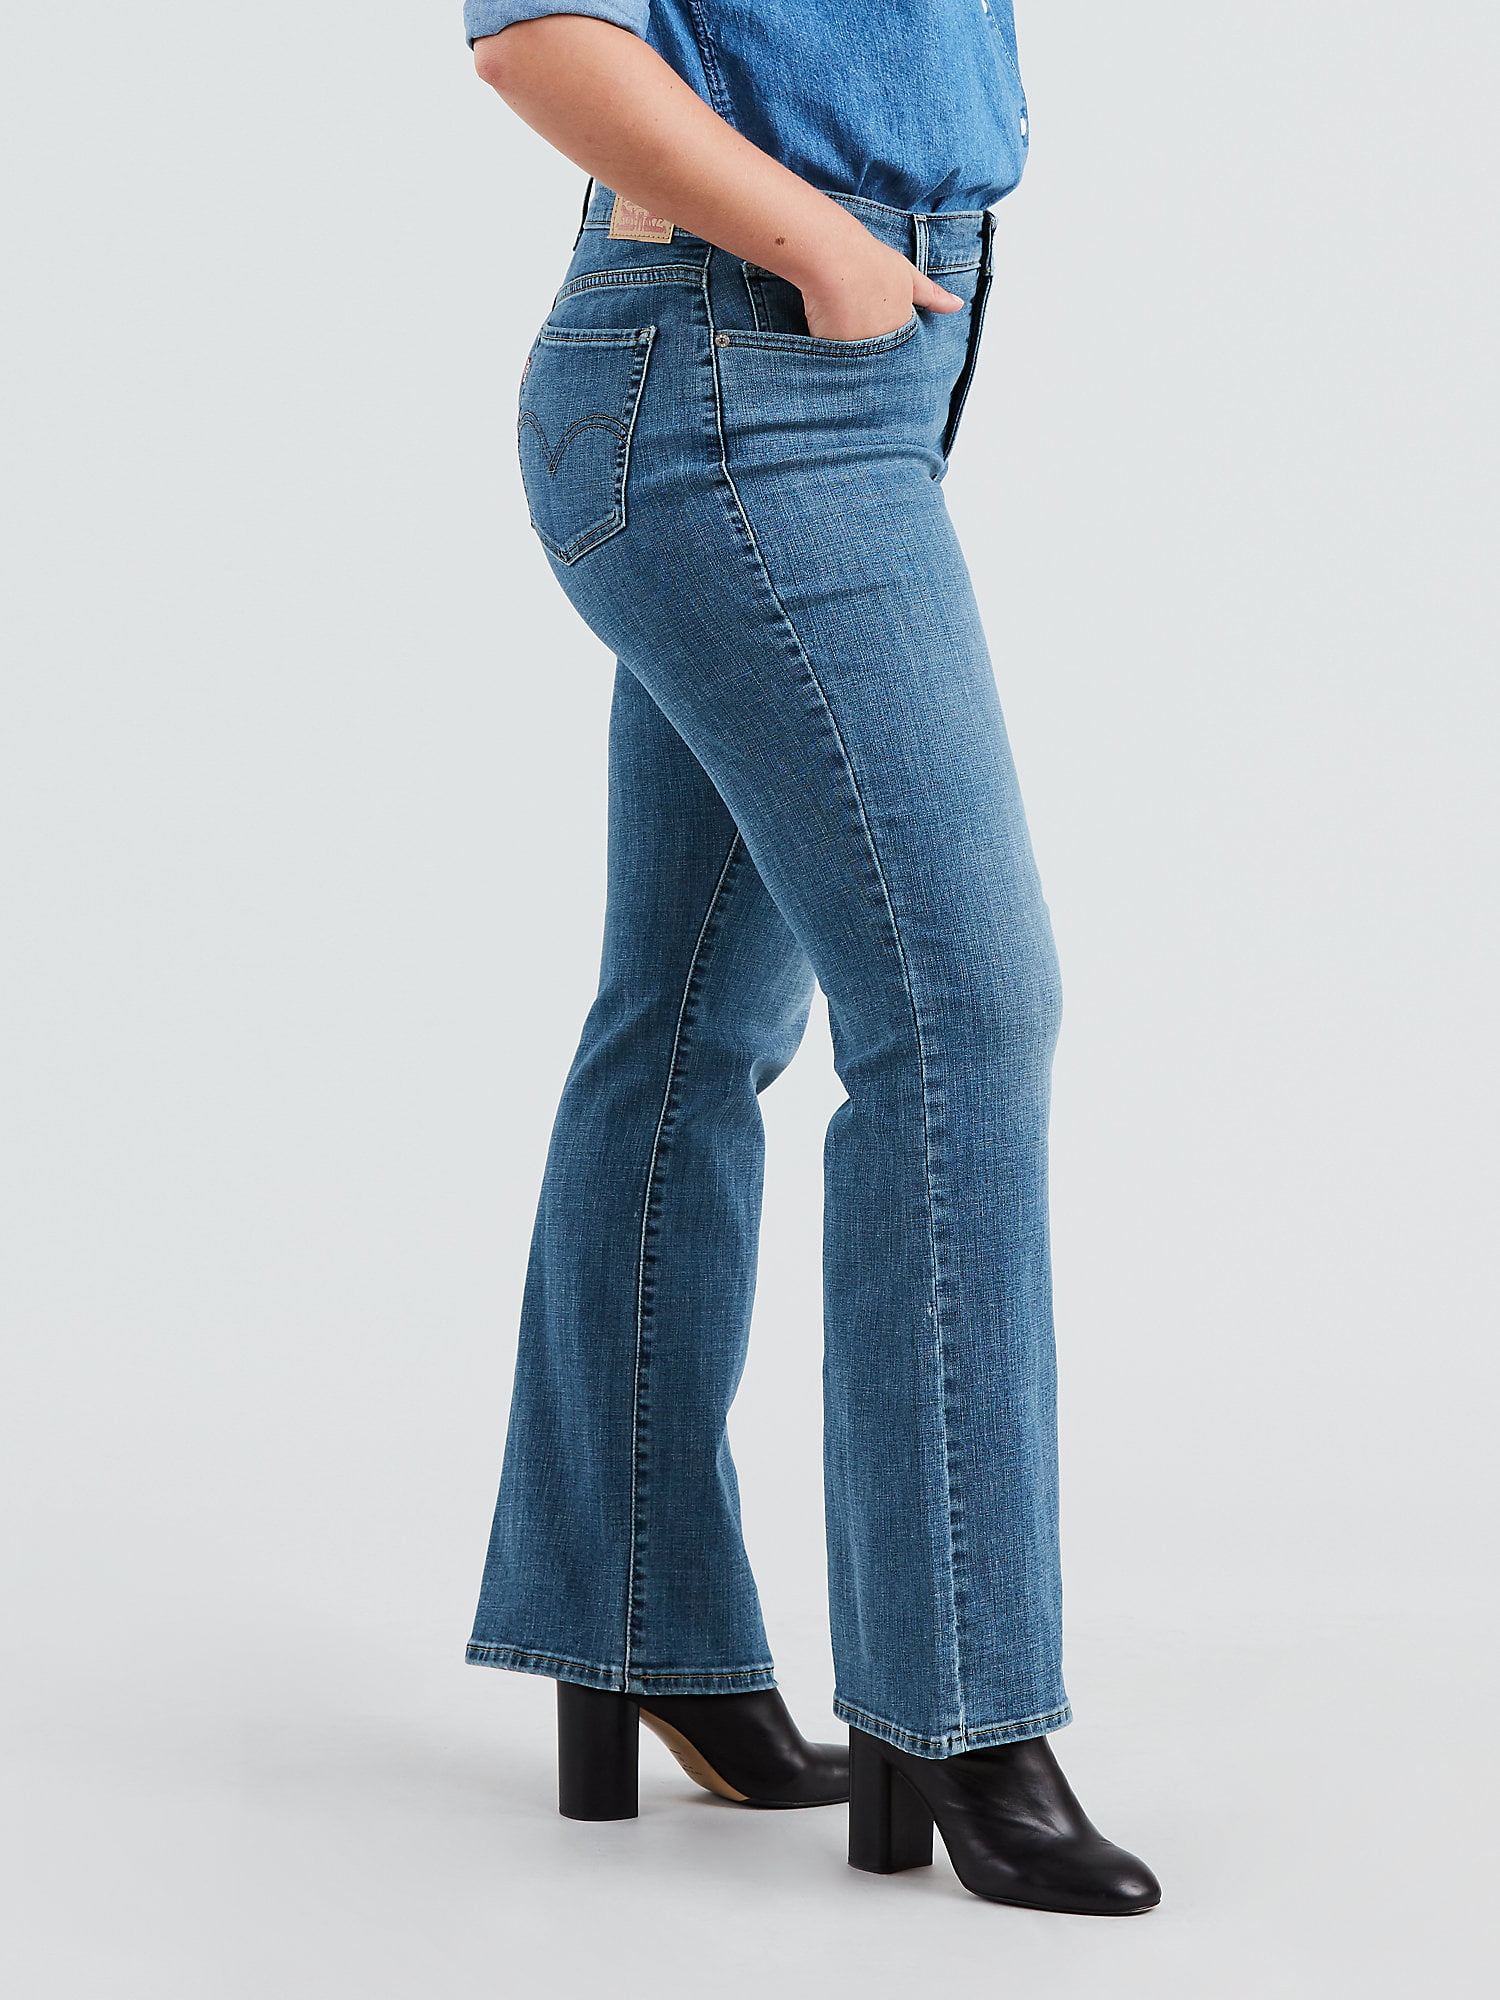 women's levi's 415 relaxed bootcut jeans